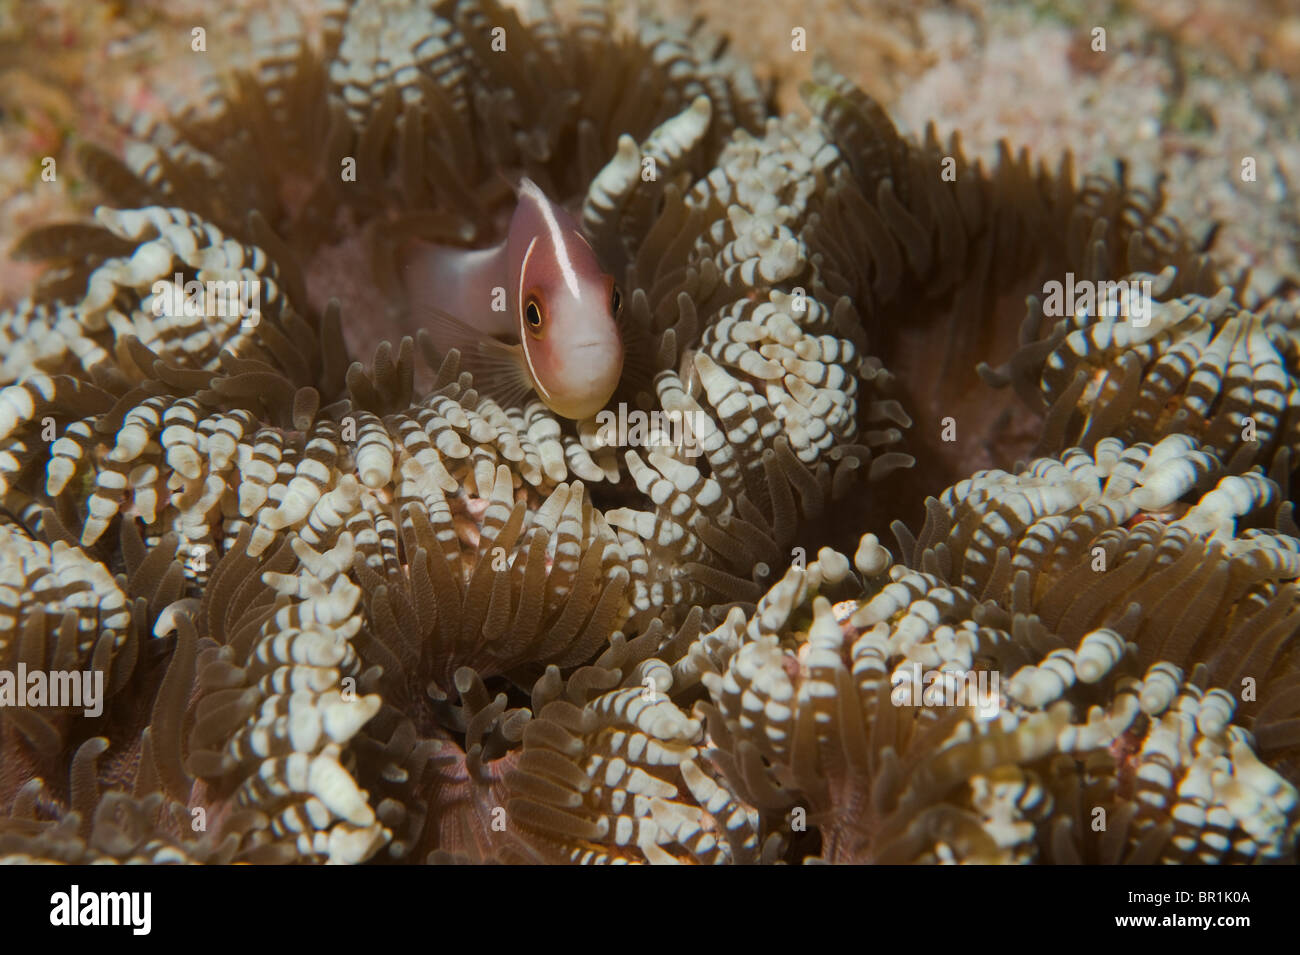 A Pink Anemonefish in a Beaded Sea Anemone on a reef in Indonesia. Stock Photo